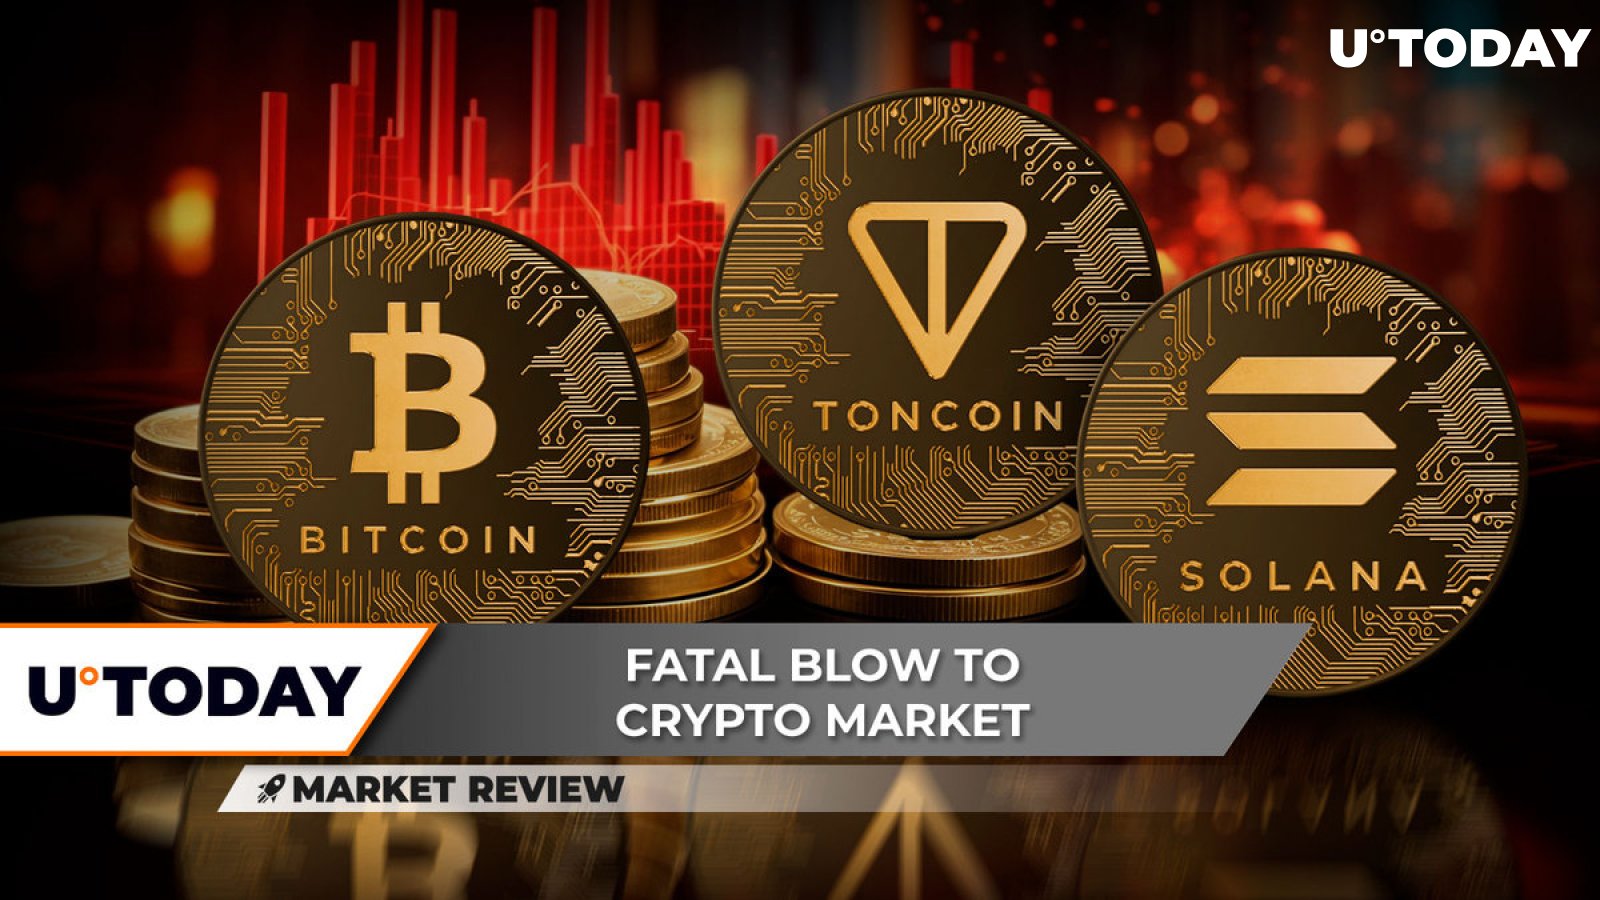 3 New Bitcoin (BTC) Support Levels to Watch, Toncoin (TON) Saw Biggest Price Drop Ever, Solana (SOL) on Strong 8% Rise as Ethereum Plummets